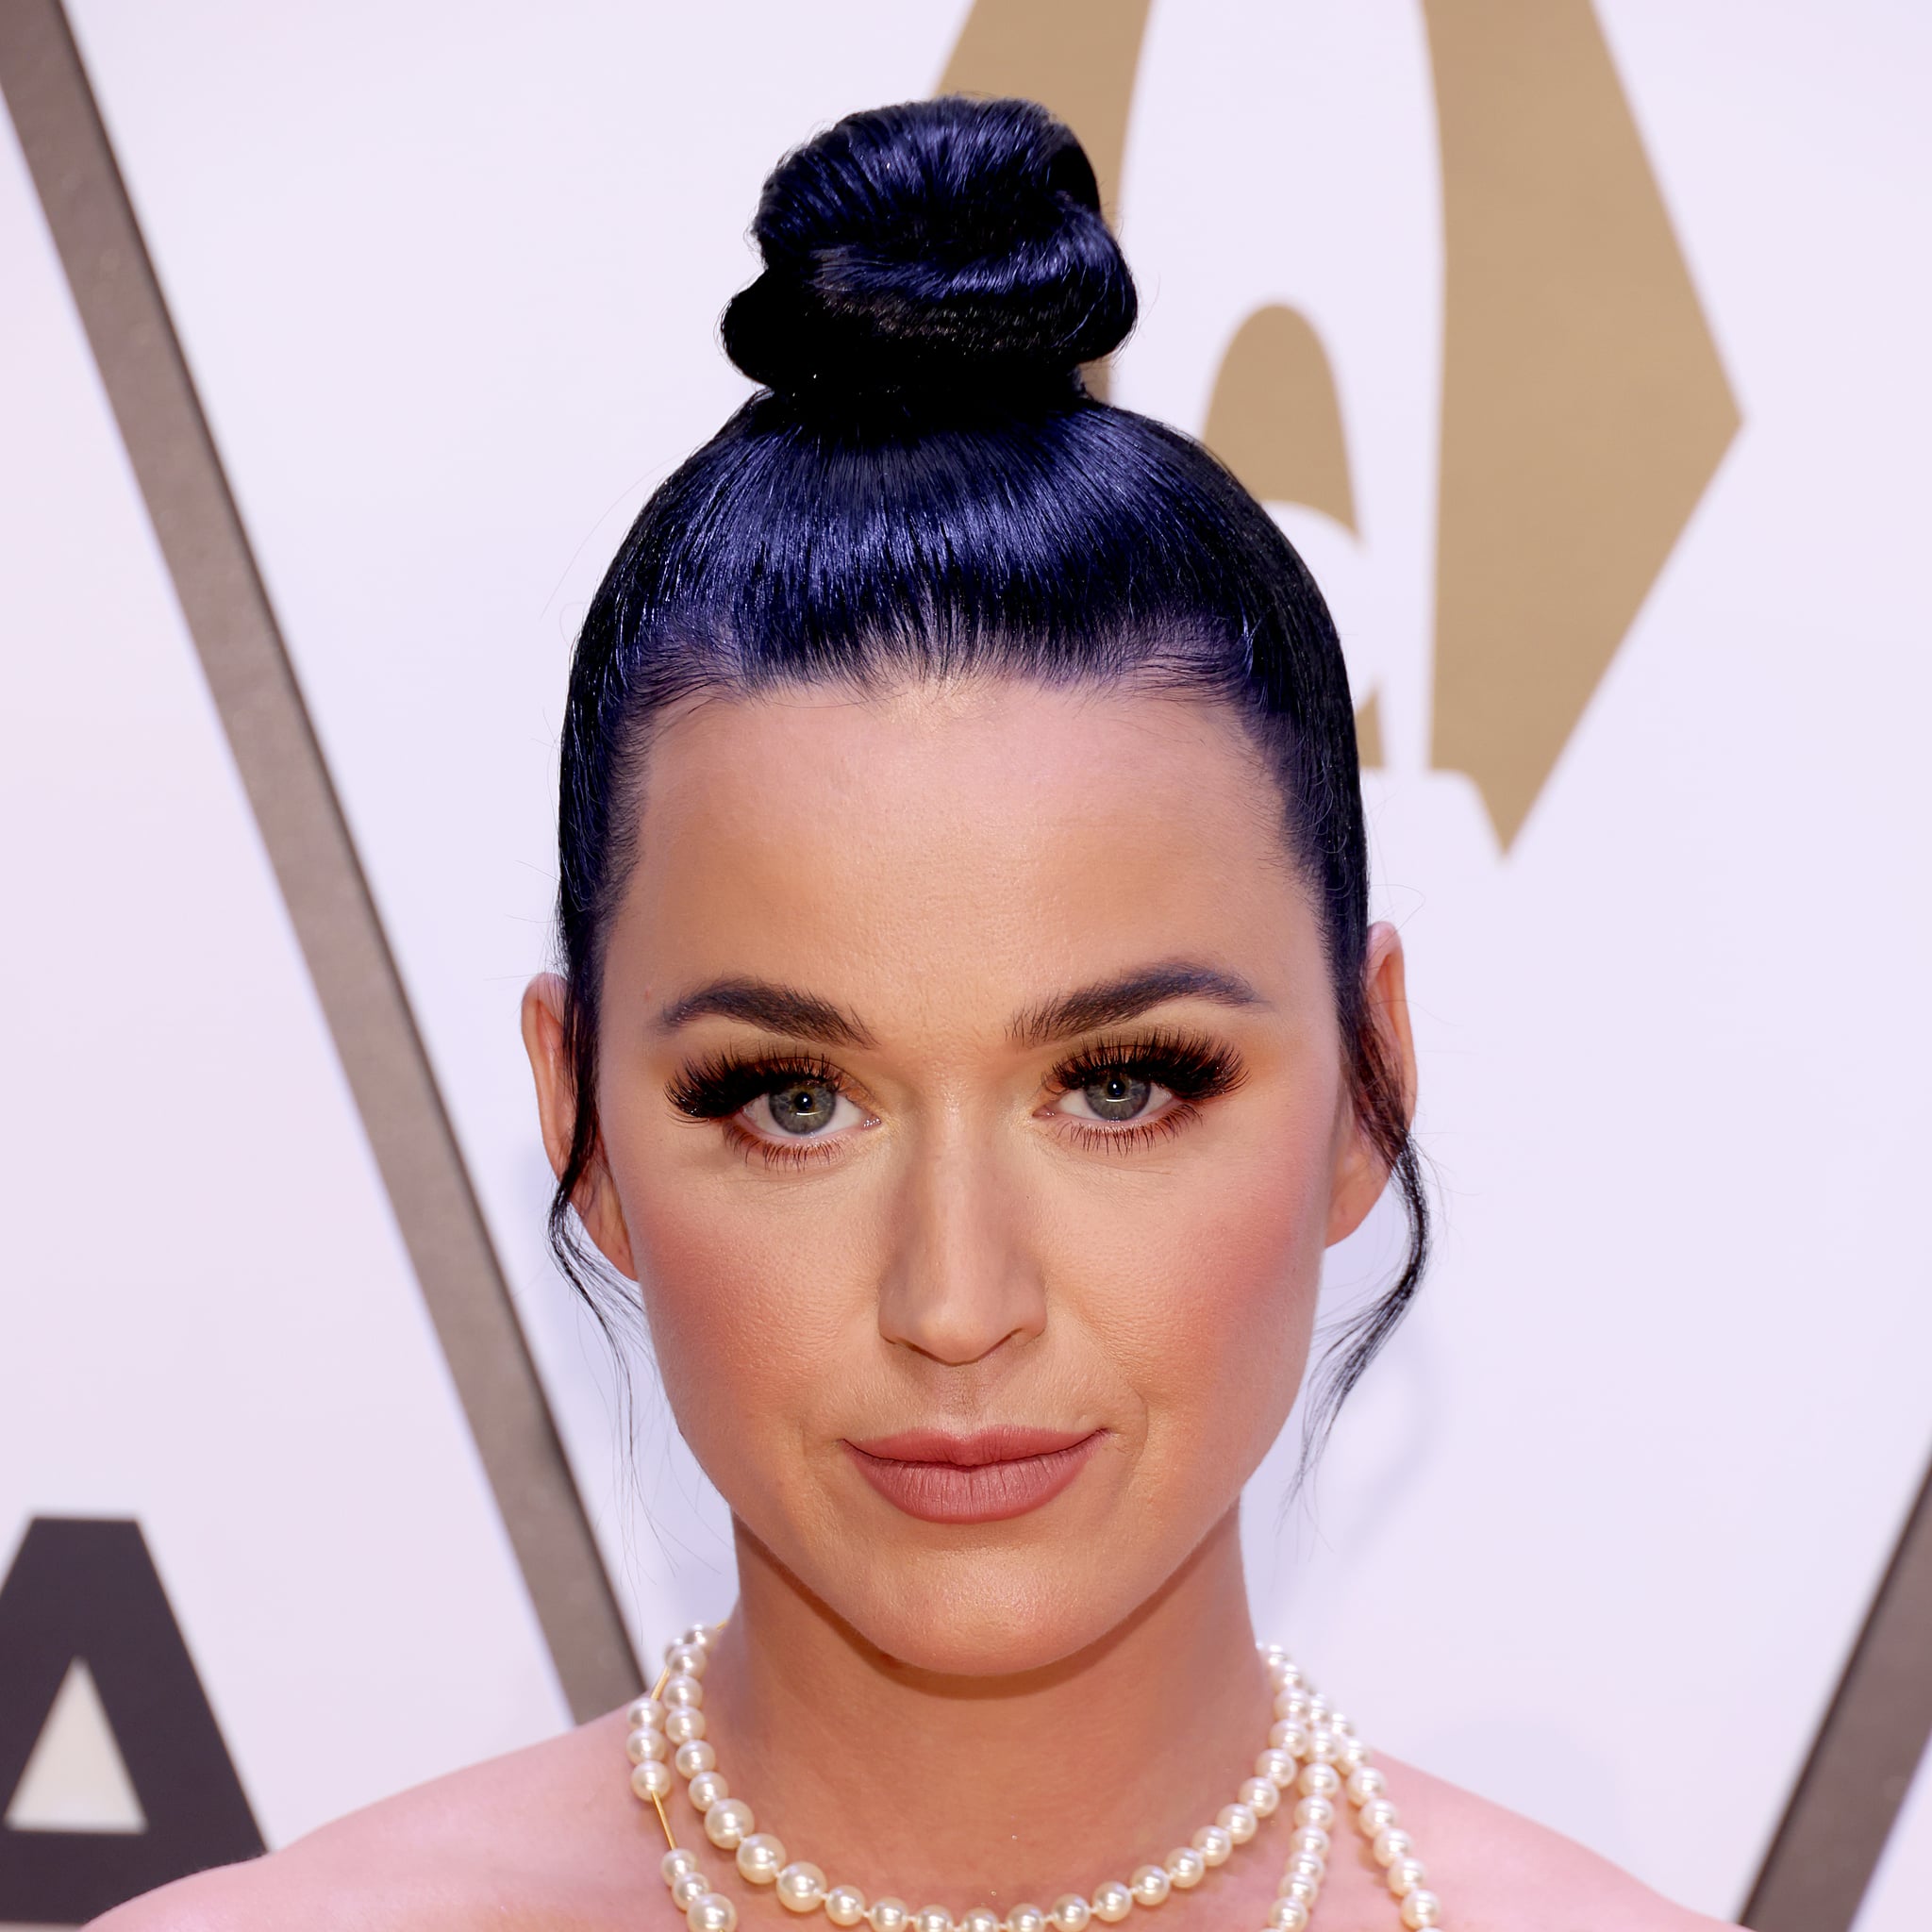 What Is Katy Perry's Natural Hair Color? | POPSUGAR Beauty